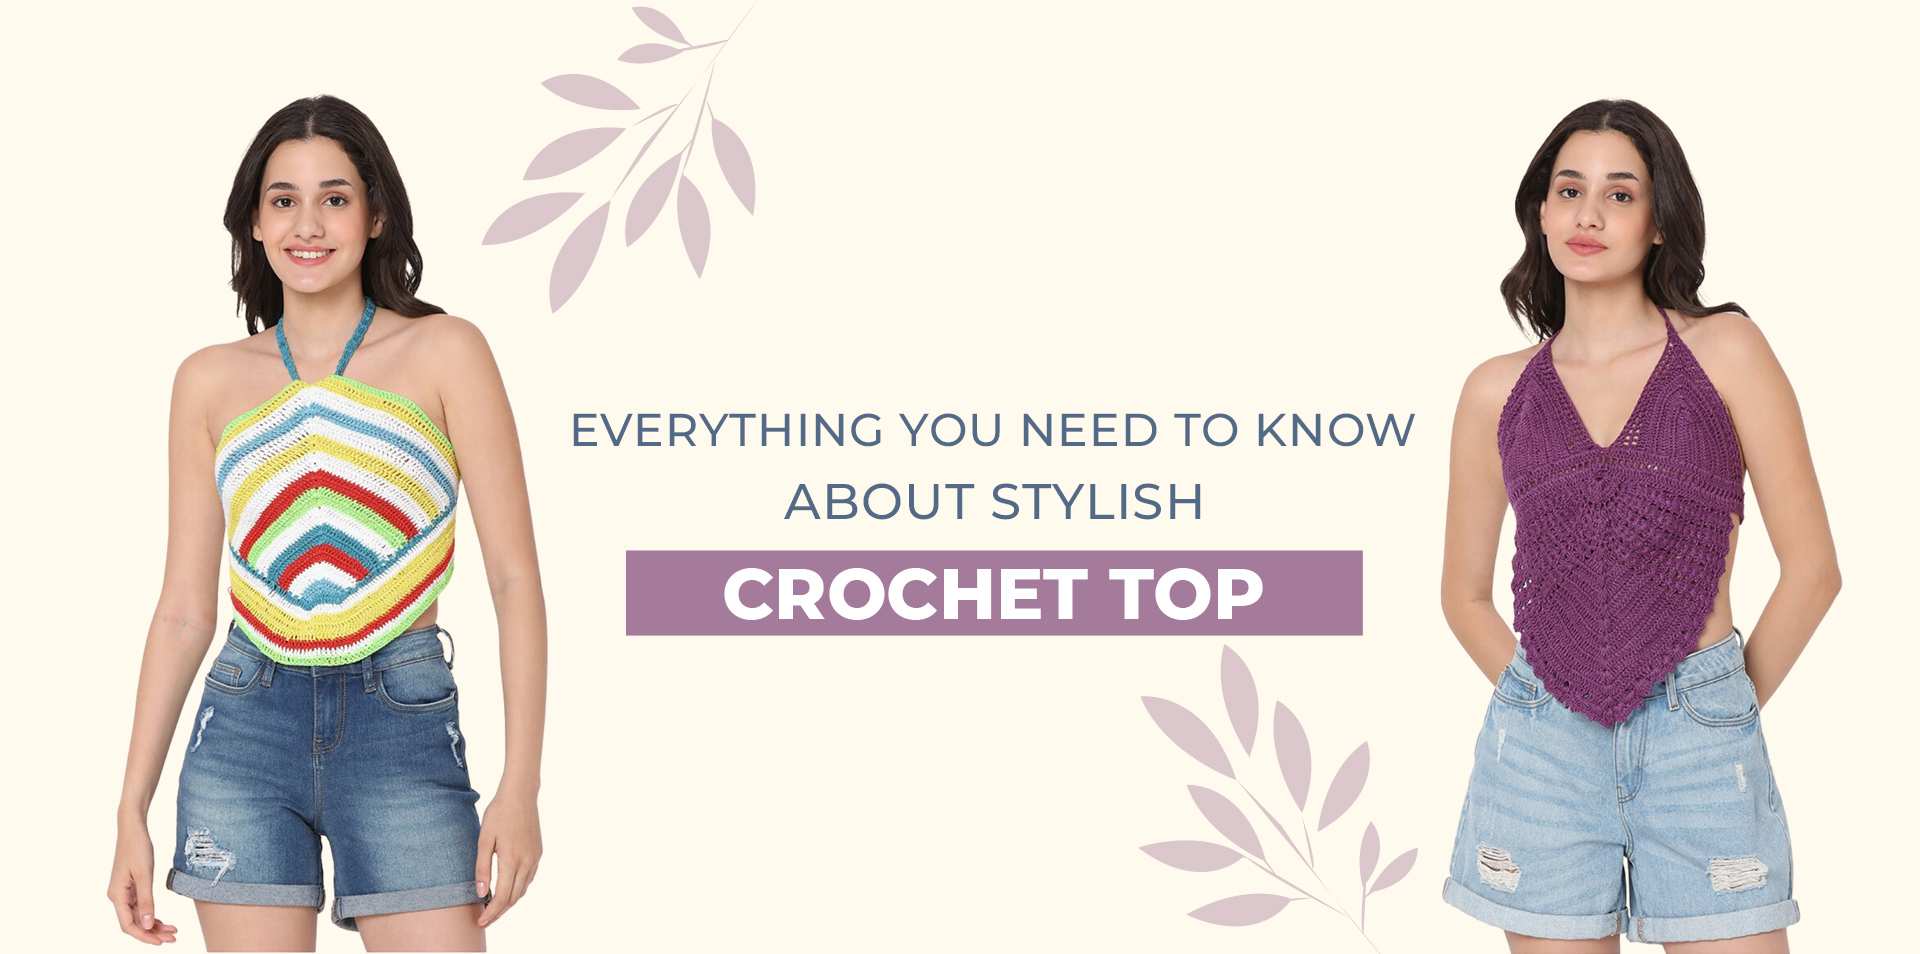 Everything You Need to Know about Stylish Crochet Tops